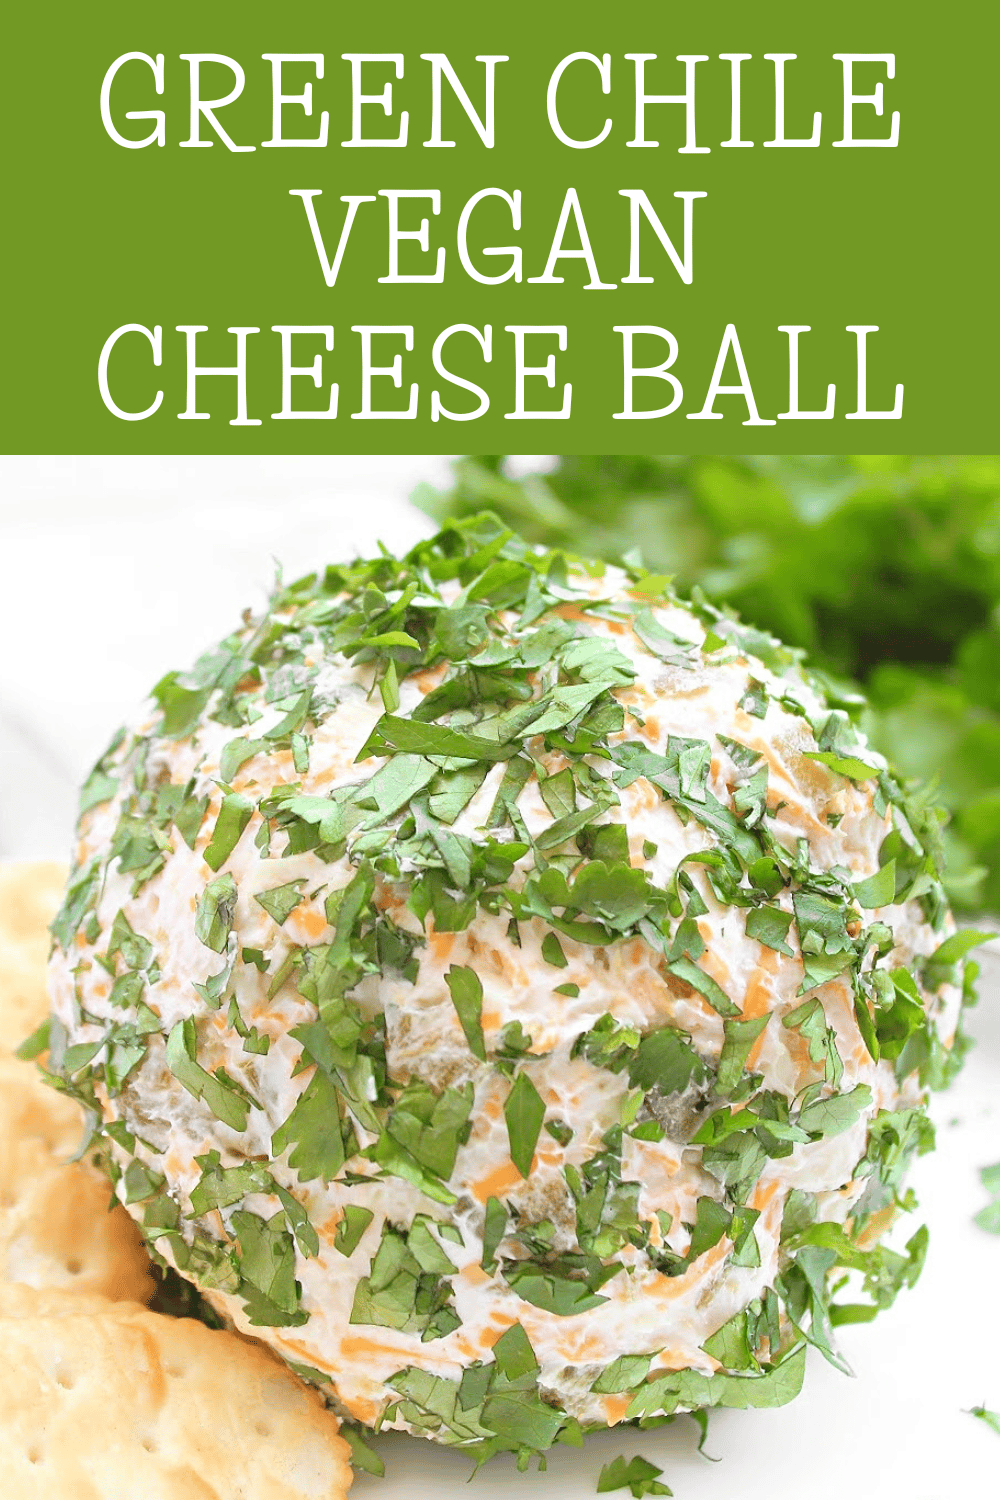 Green Chile Cheese Ball ~ This dairy-free and nut-free cheese ball is easy to make and loaded with savory Southwestern flavor! via @thiswifecooks